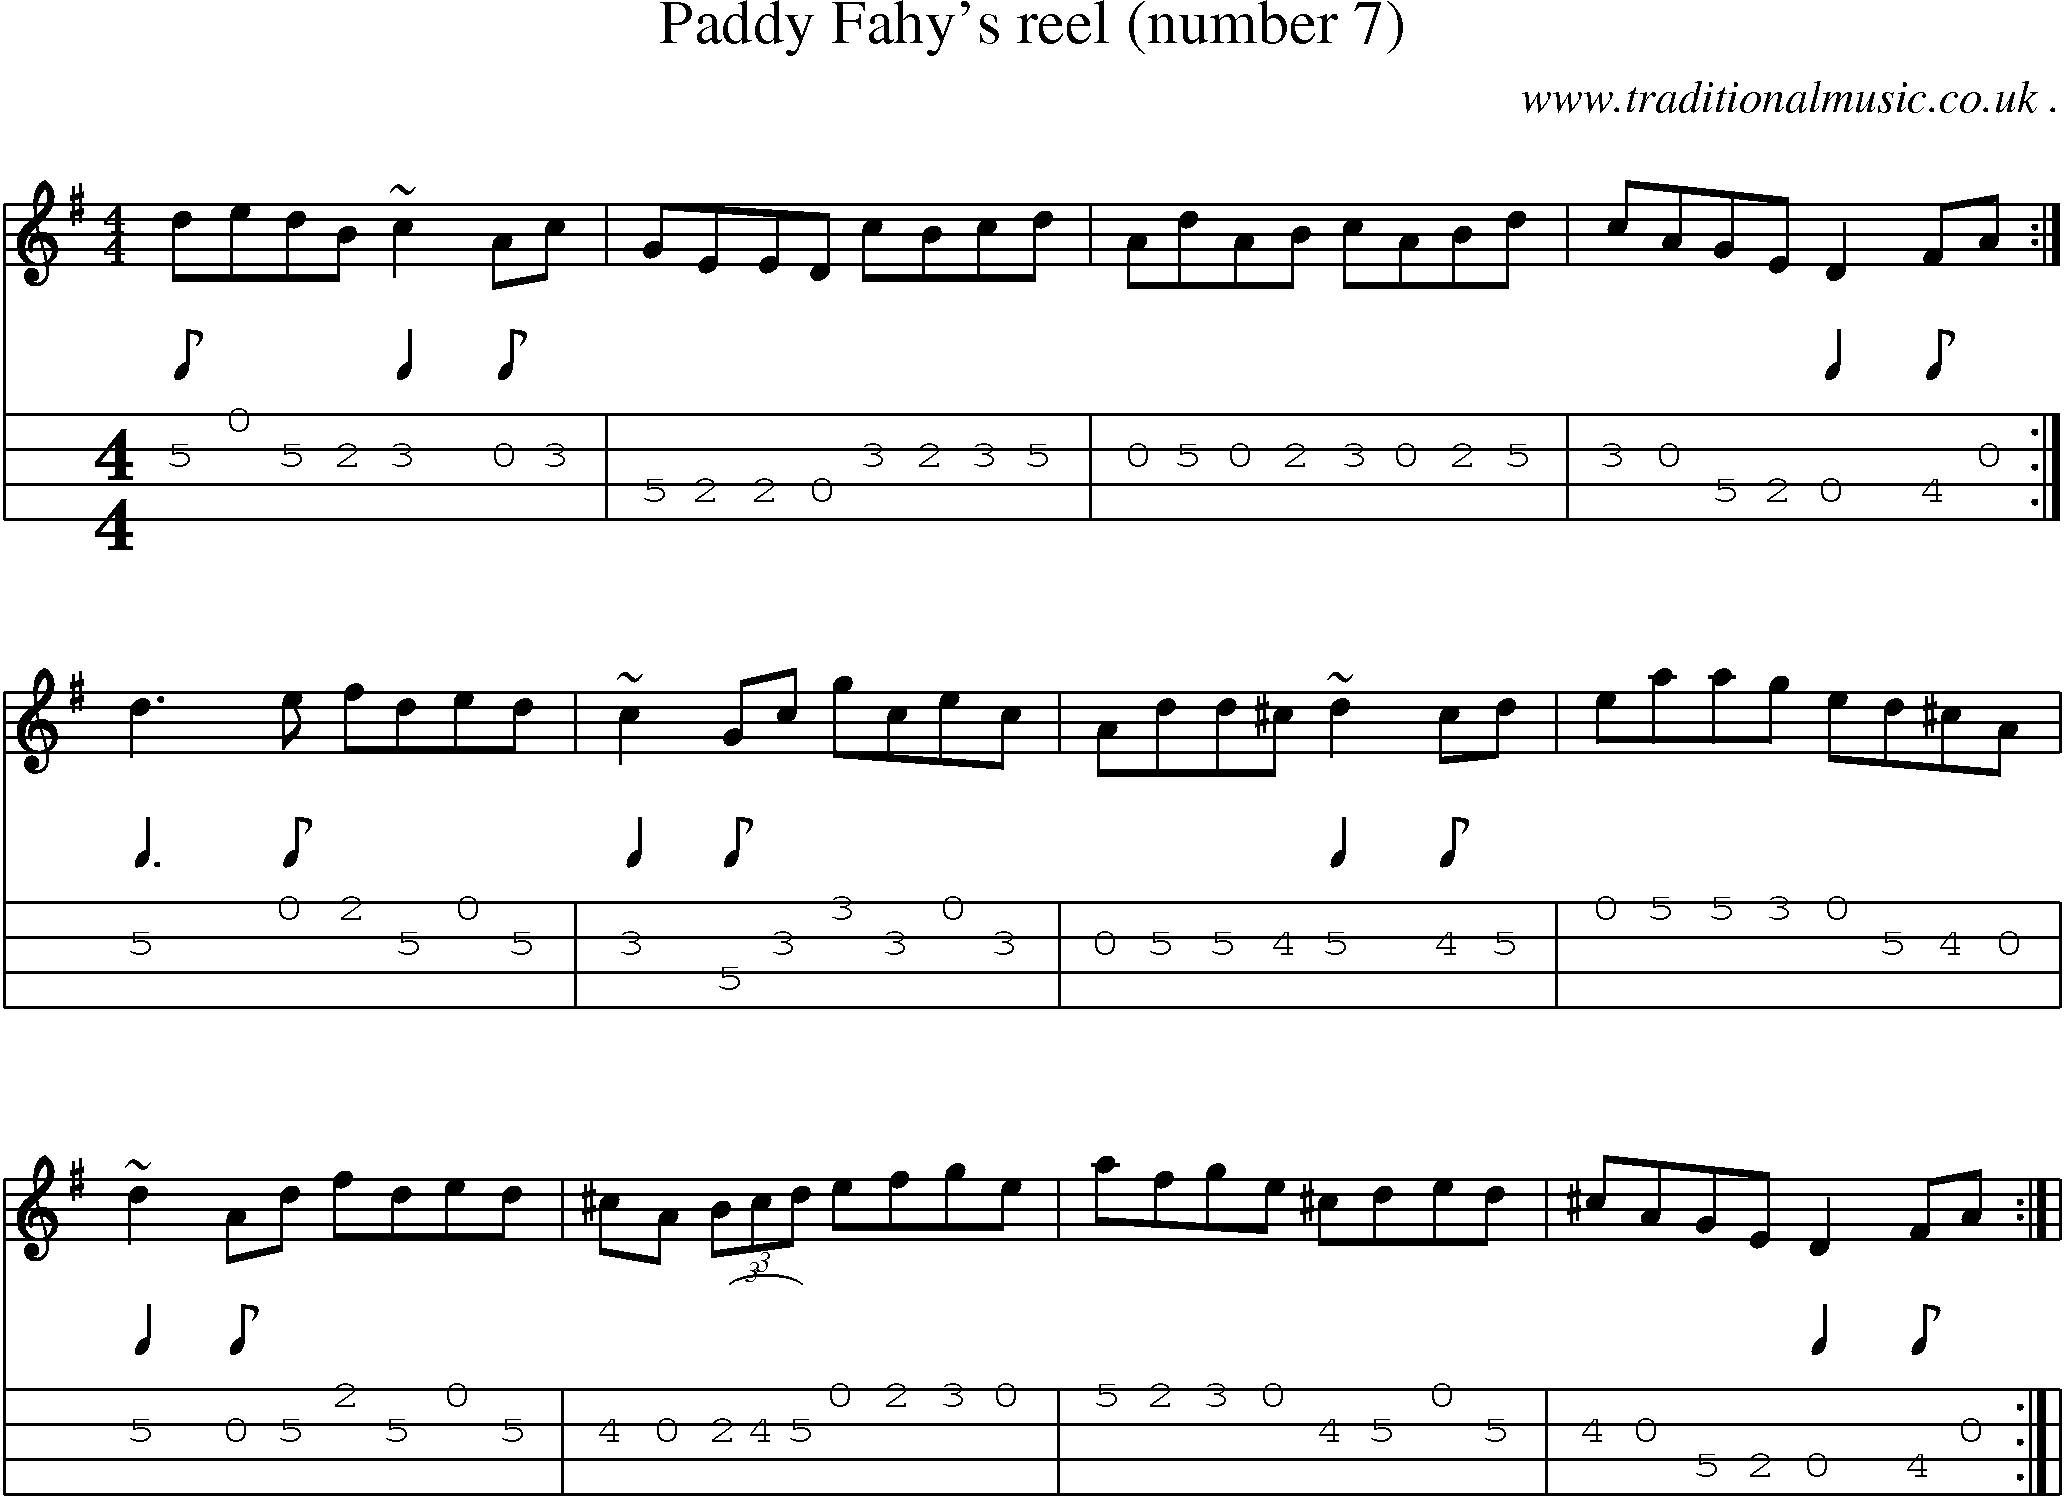 Sheet-music  score, Chords and Mandolin Tabs for Paddy Fahys Reel Number 7